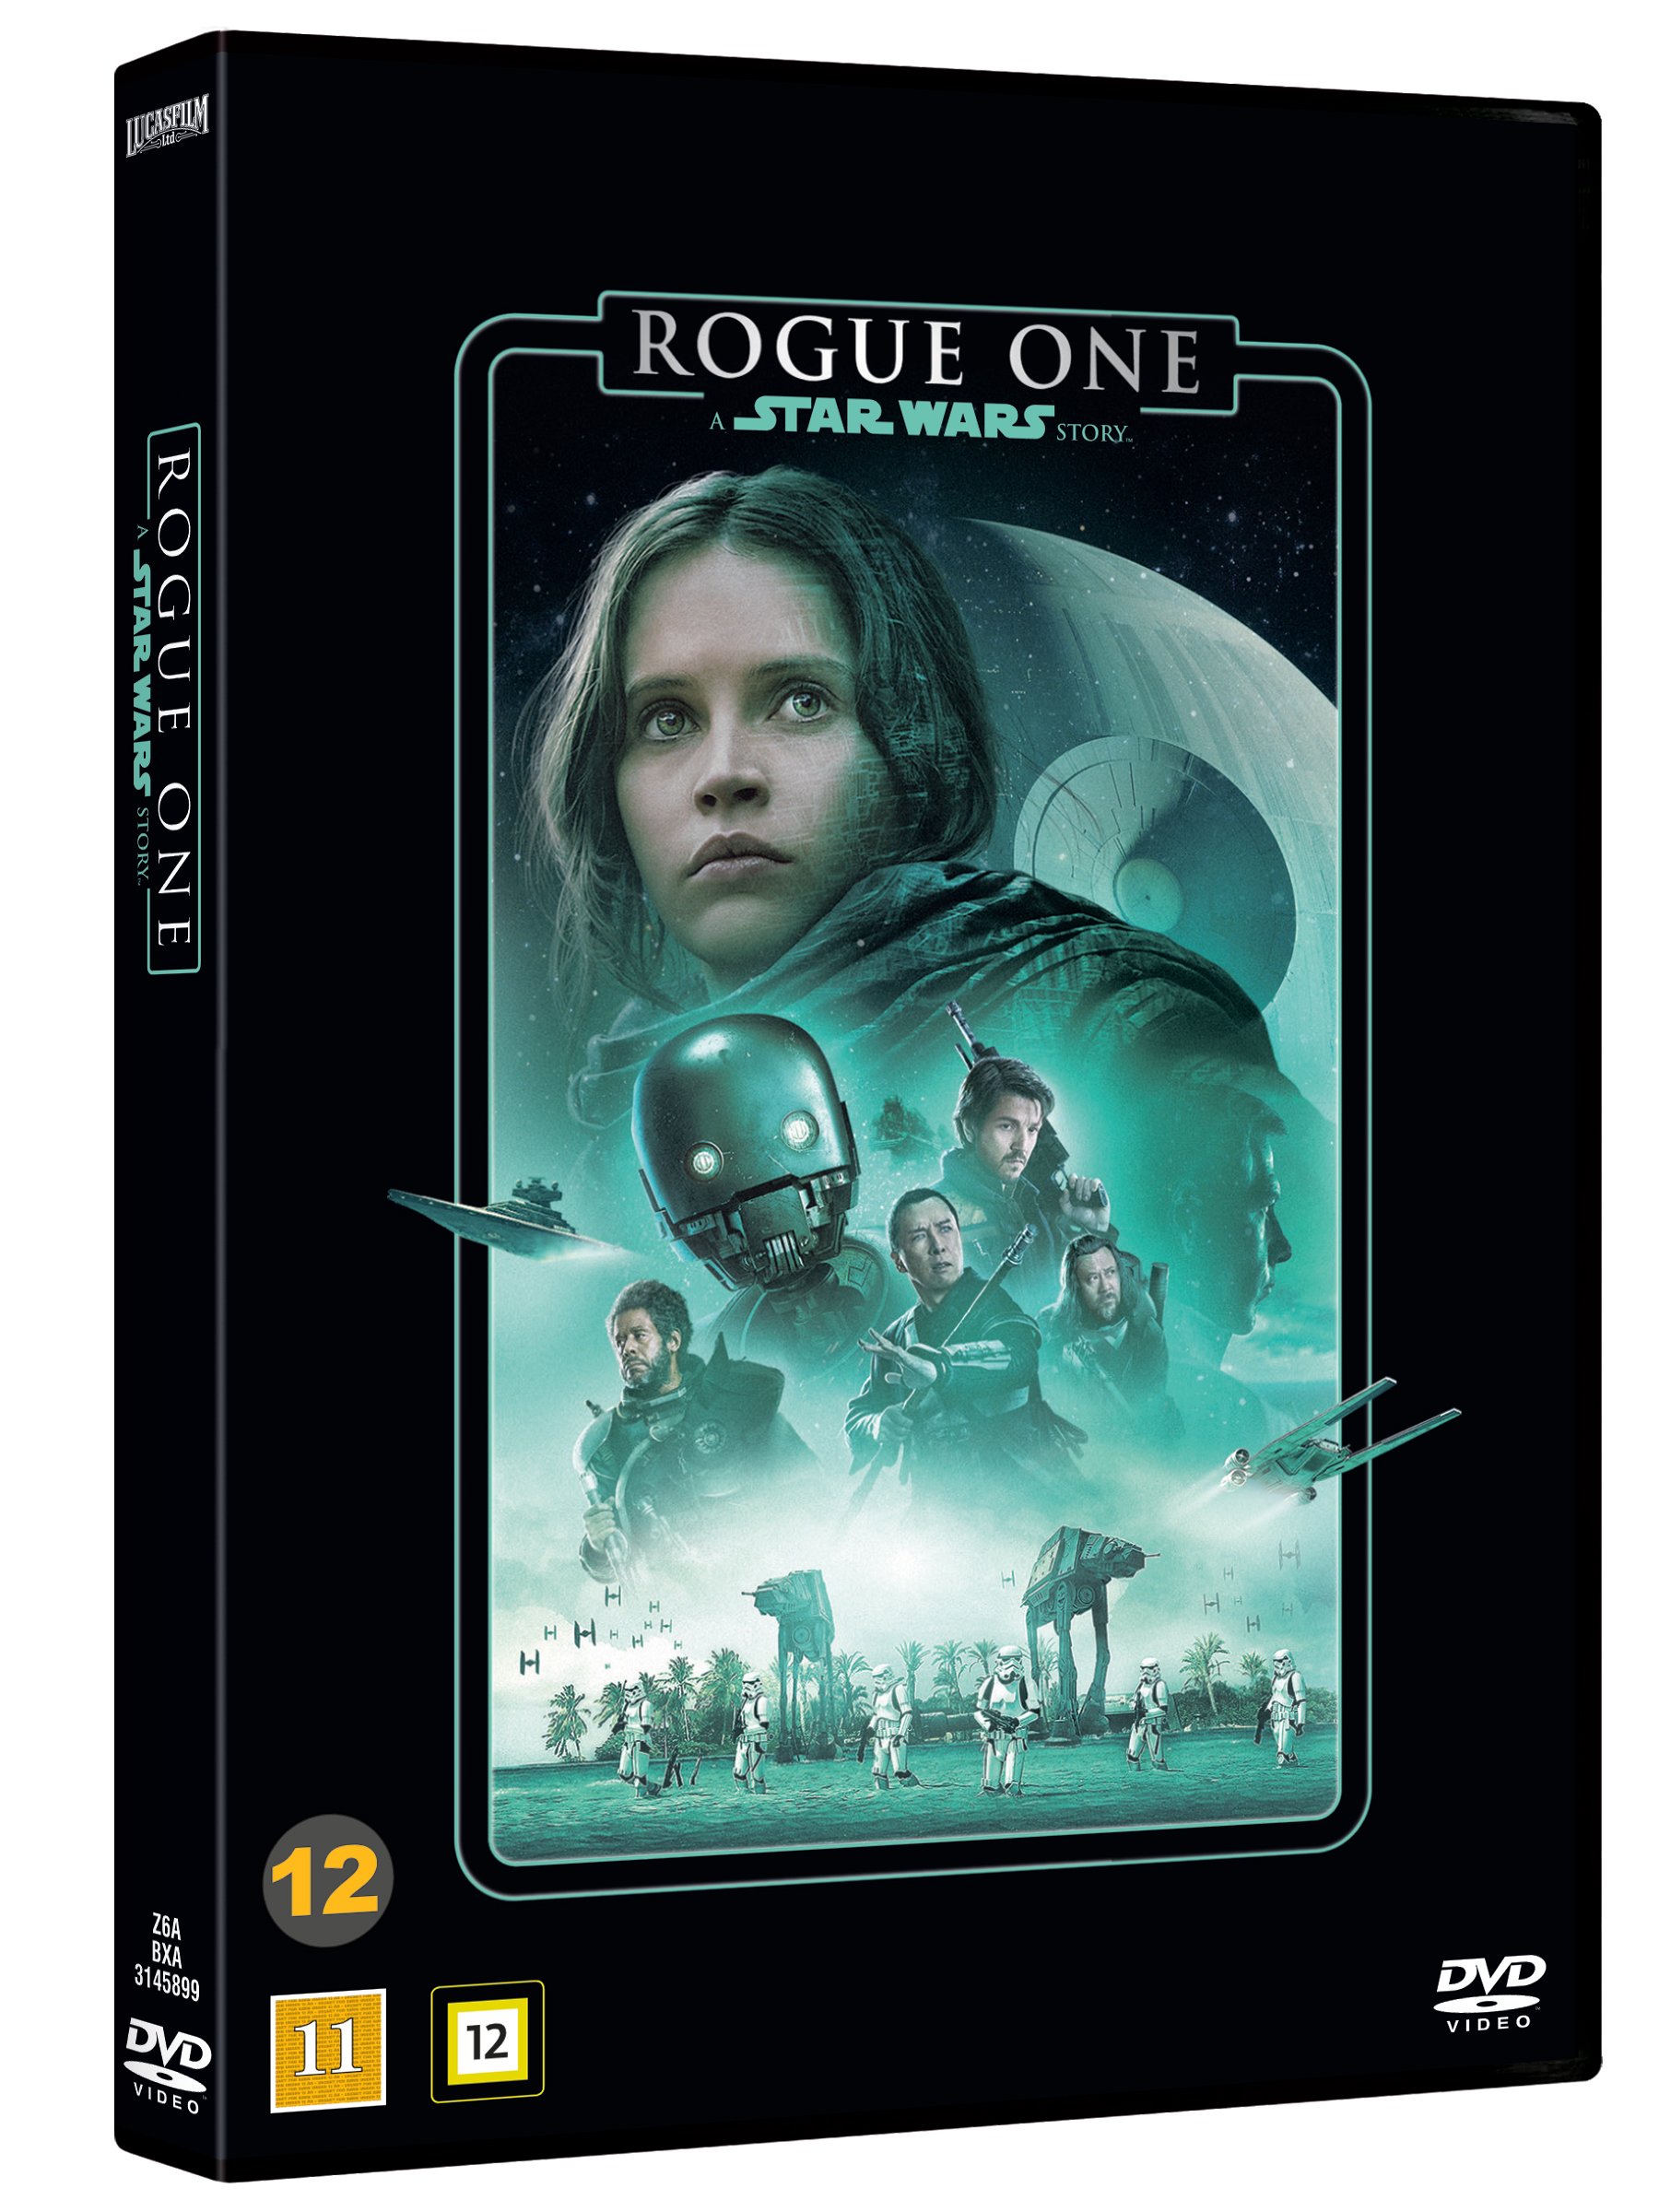 instal the last version for ios Rogue One: A Star Wars Story